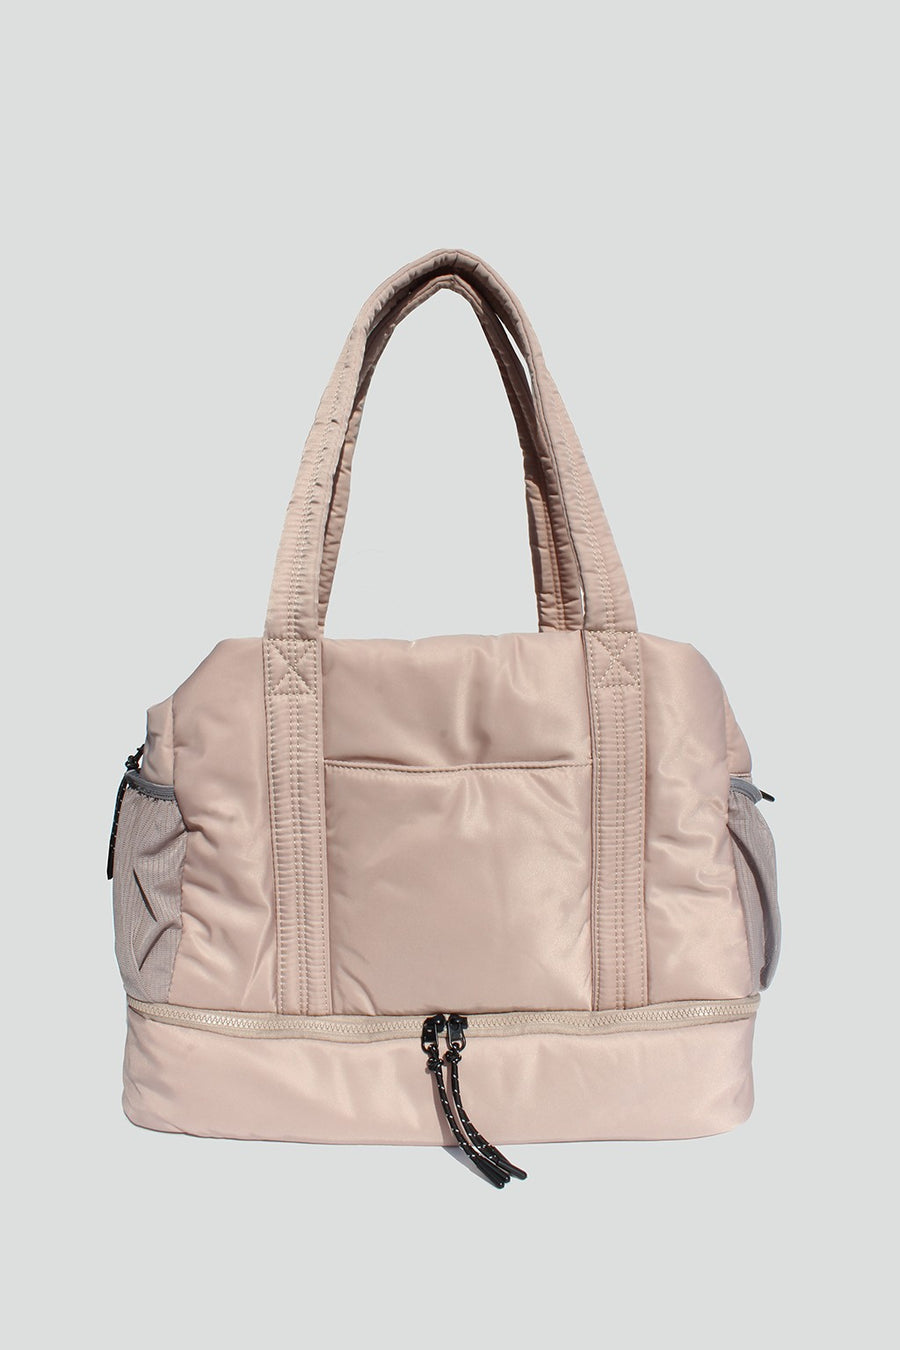 Featuring an over the shoulder/Crossbody duffle style bag with triple interior compartments and adjustable detachable straps in the color ivory 